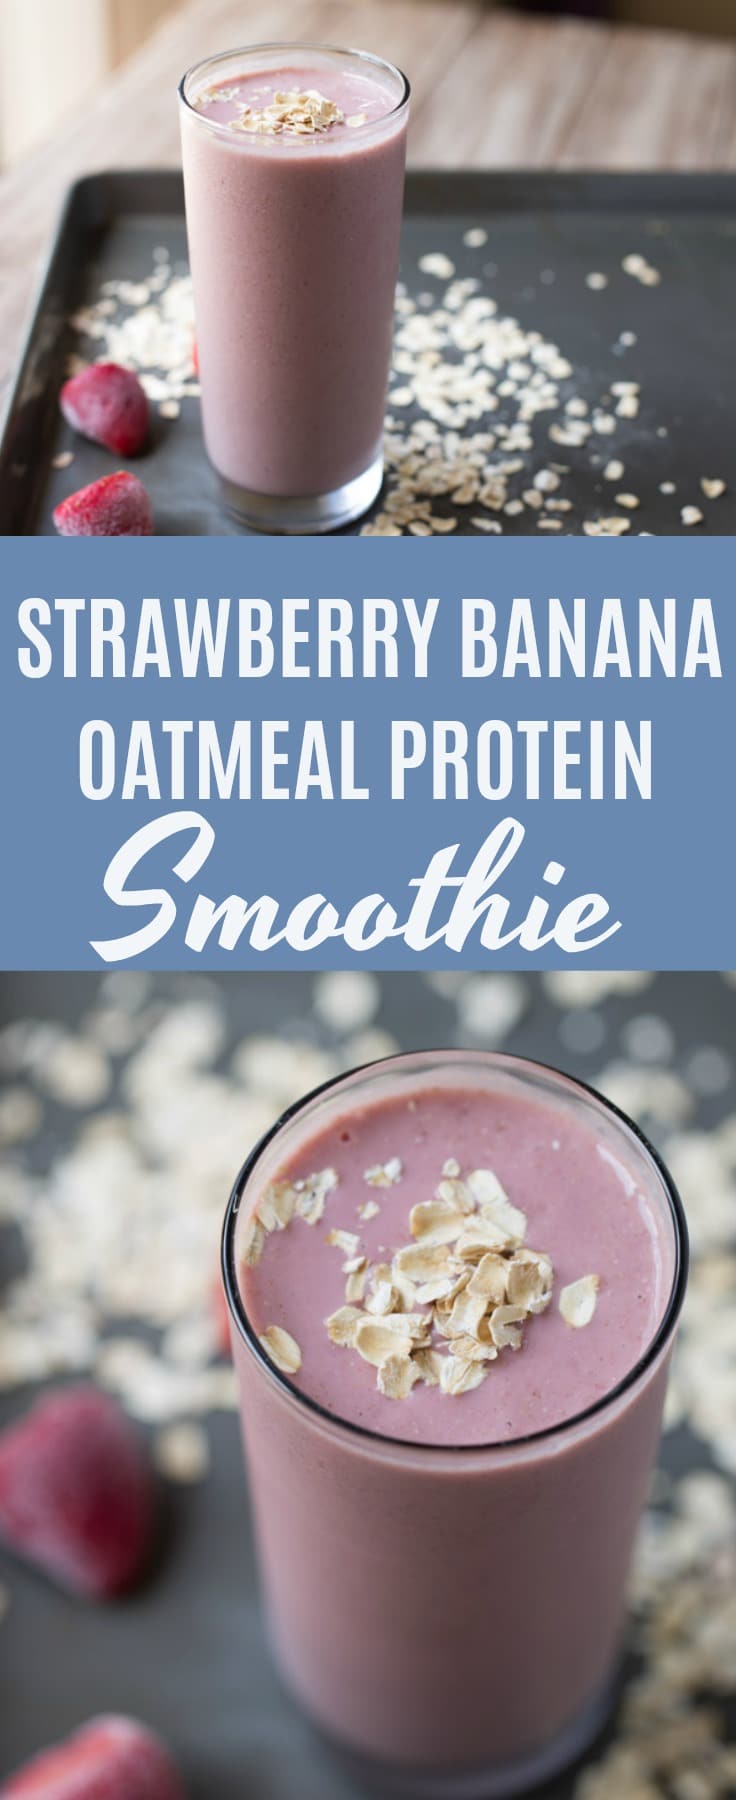 This Strawberry Banana Oatmeal Protein is super thick, creamy and will keep you full until lunchtime. Use gluten free oats to keep it gluten free! #smoothie #plantbased #breakfast #vegetarian #realfood #glutenfree